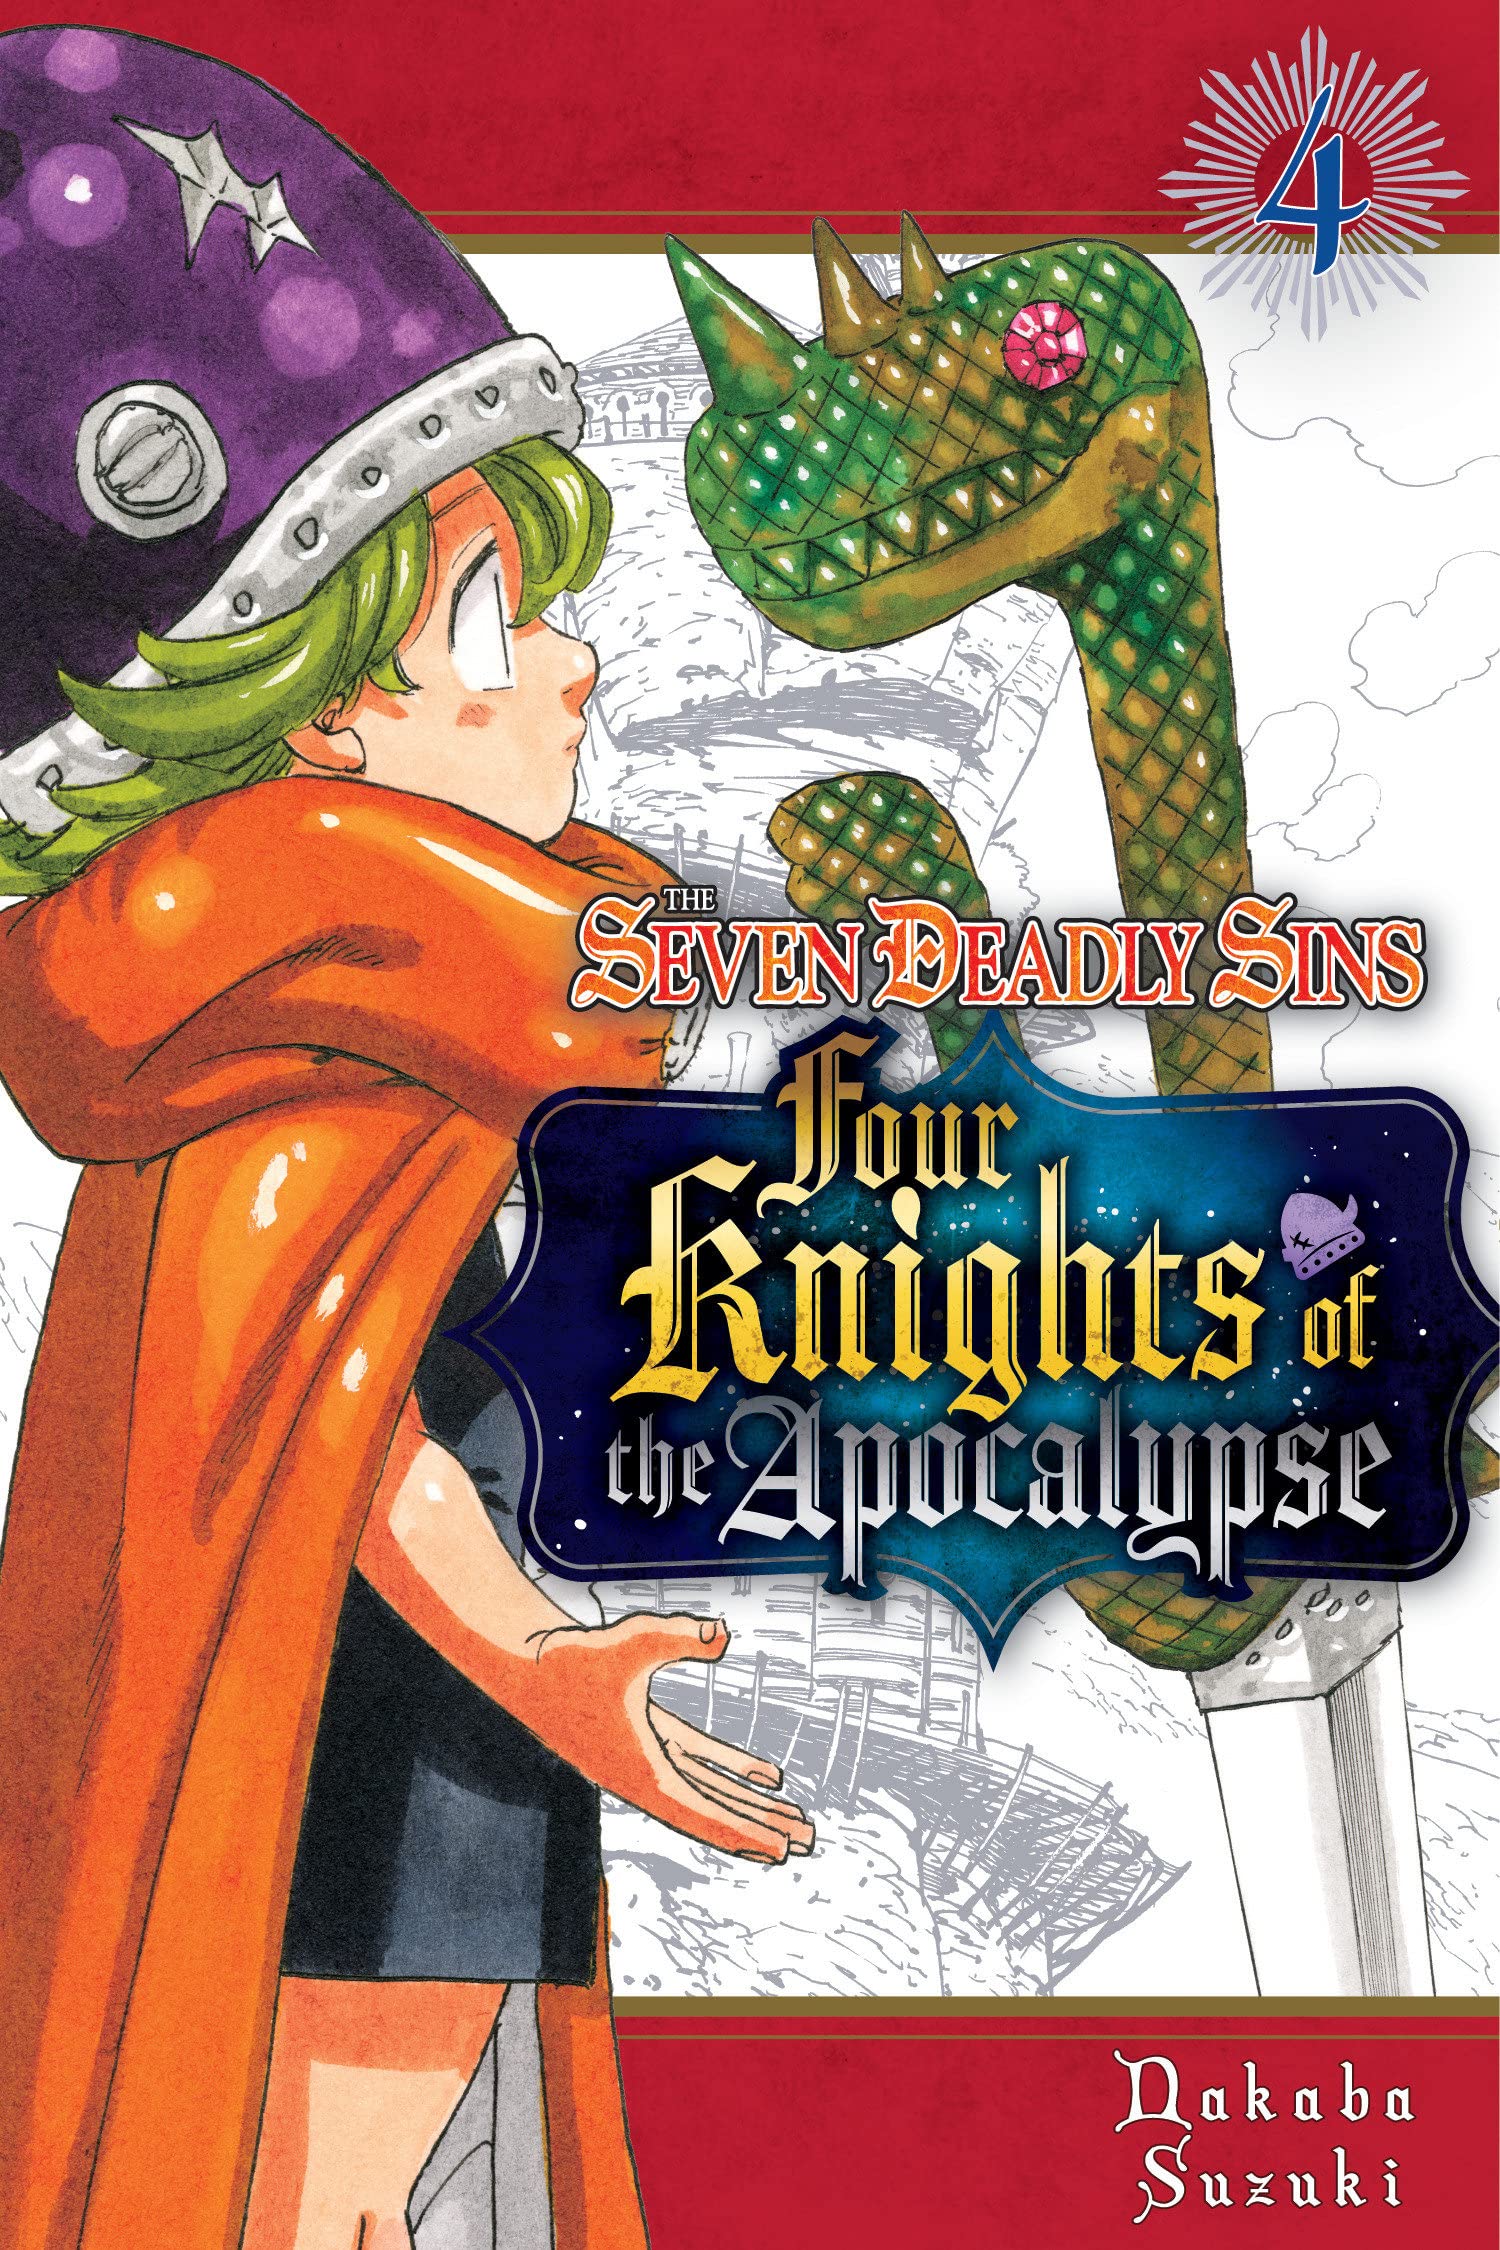 The Seven Deadly Sins: Four Knights of the Apocalypse - Volume 4